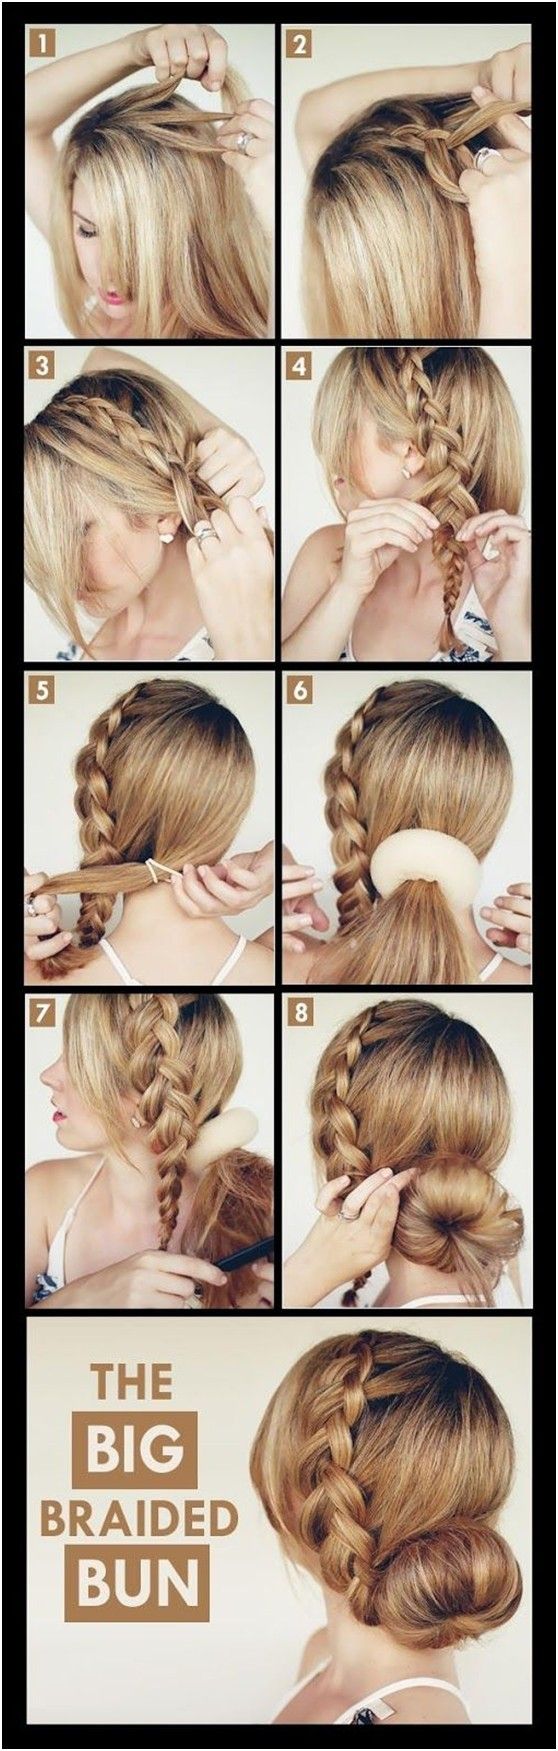 19 Fabulous Braided Updo Hairstyles With Tutorials - Pretty Designs